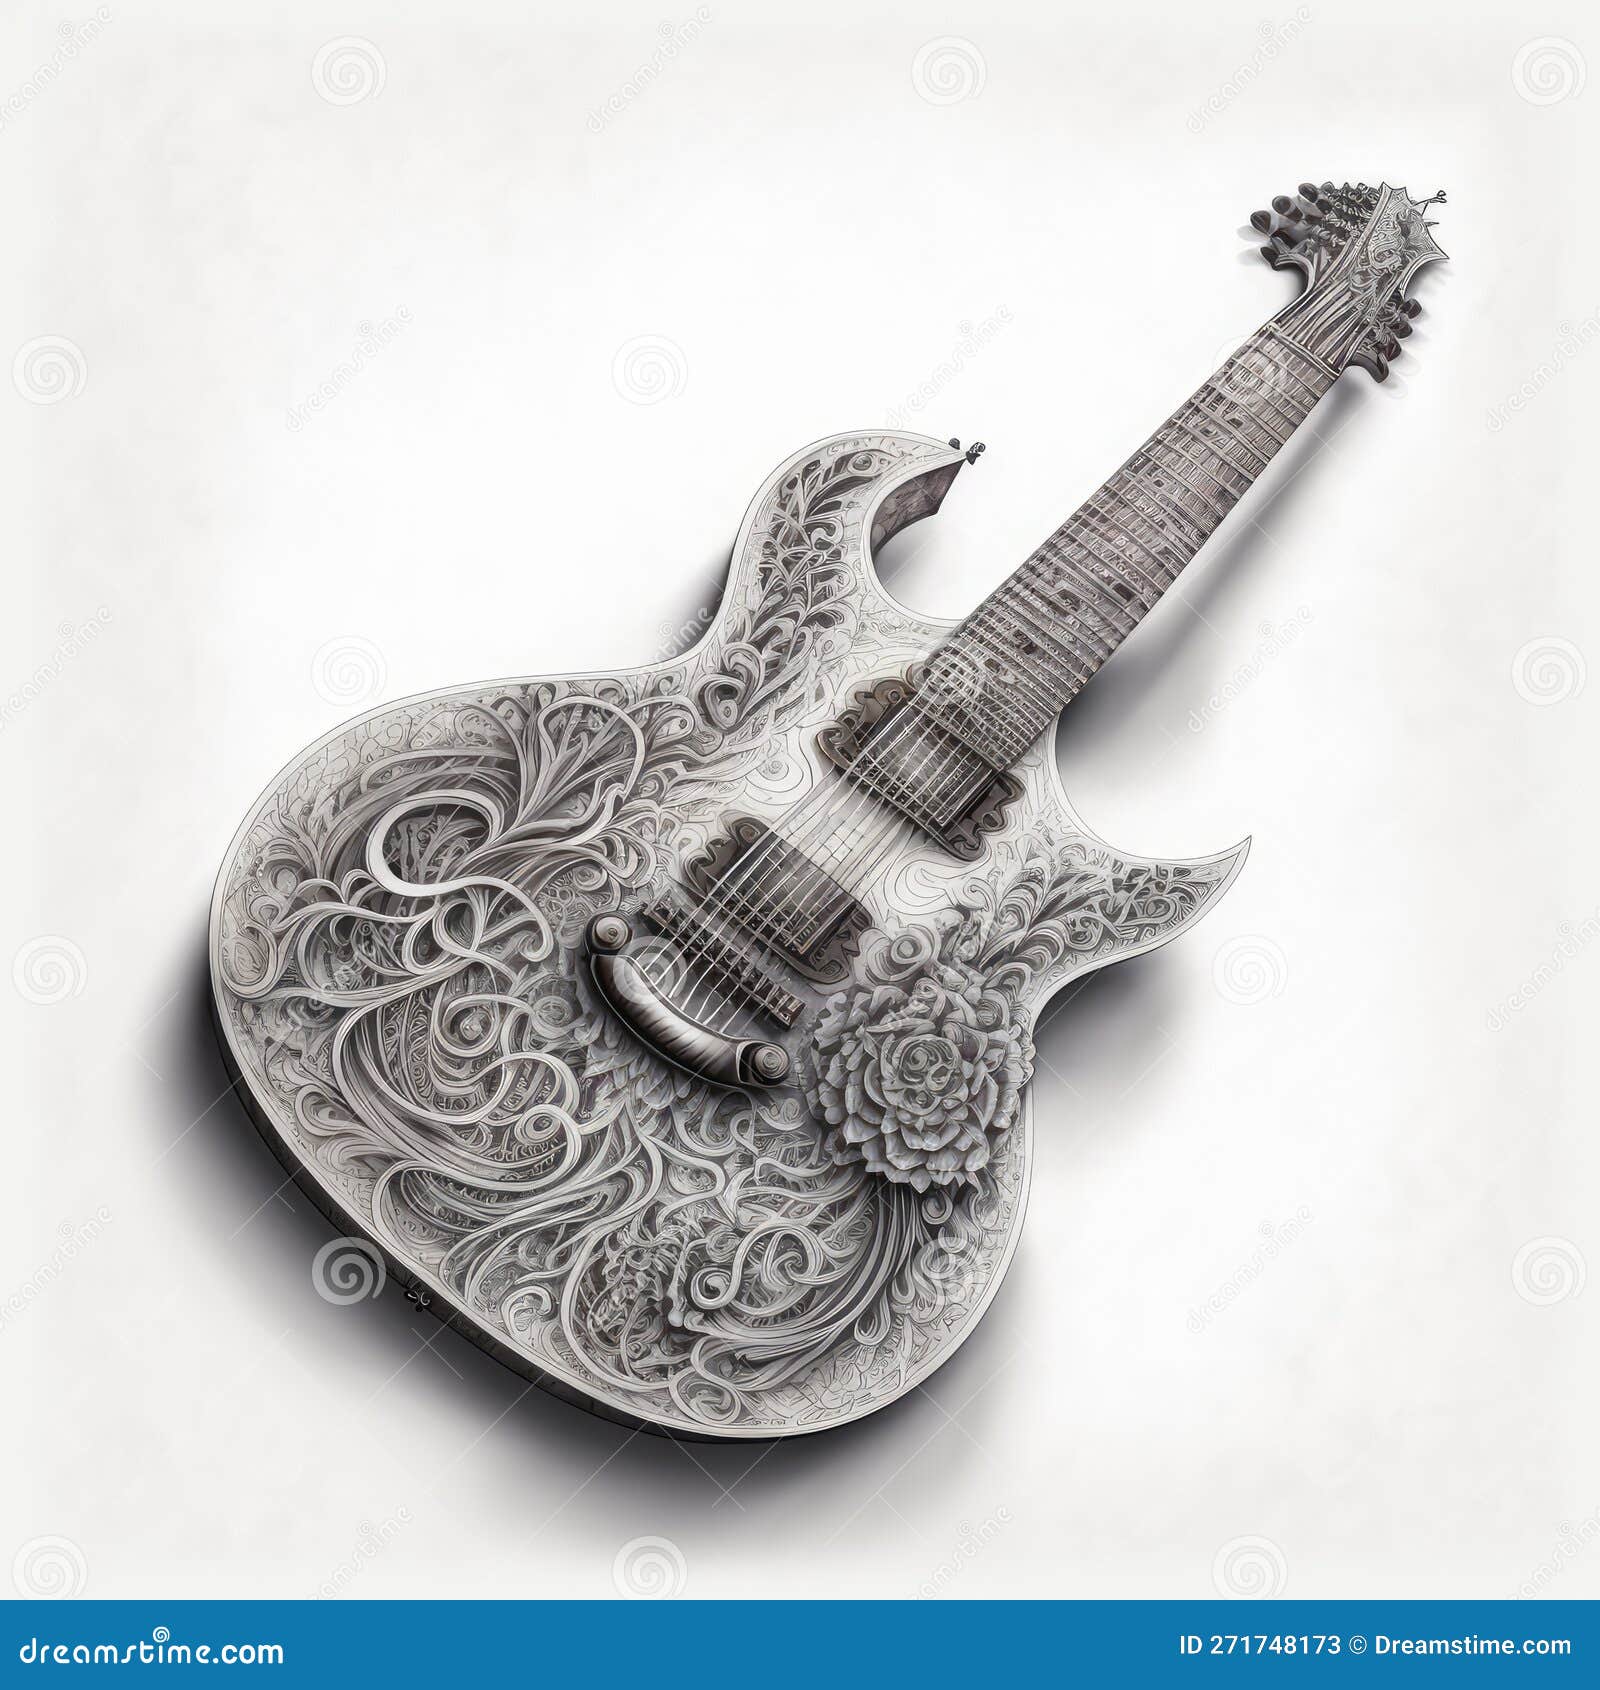 Share 76+ sketching of guitar latest